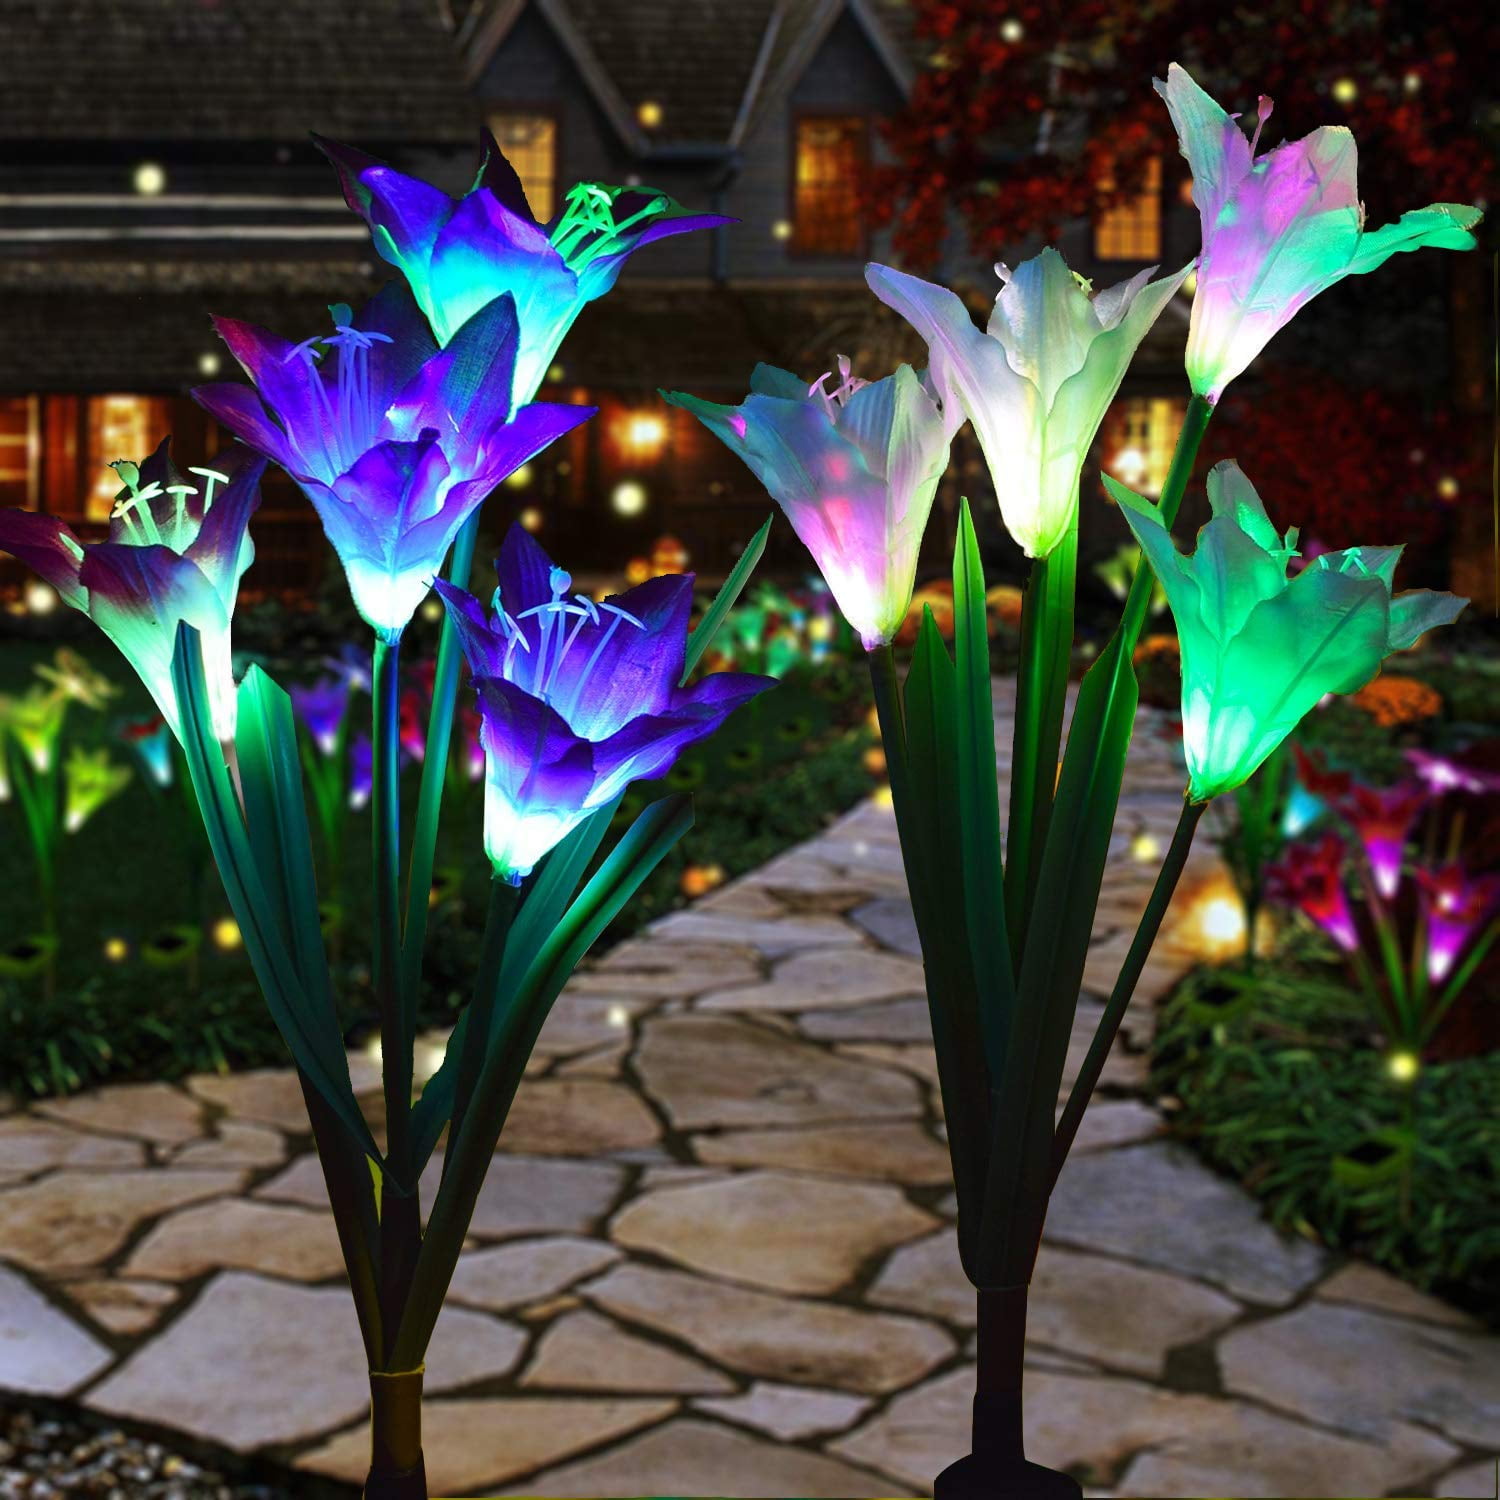 4 LED Solar Powered Lily Flower Lamp Stake Garden Lights Outdoor Yard Home Decor 